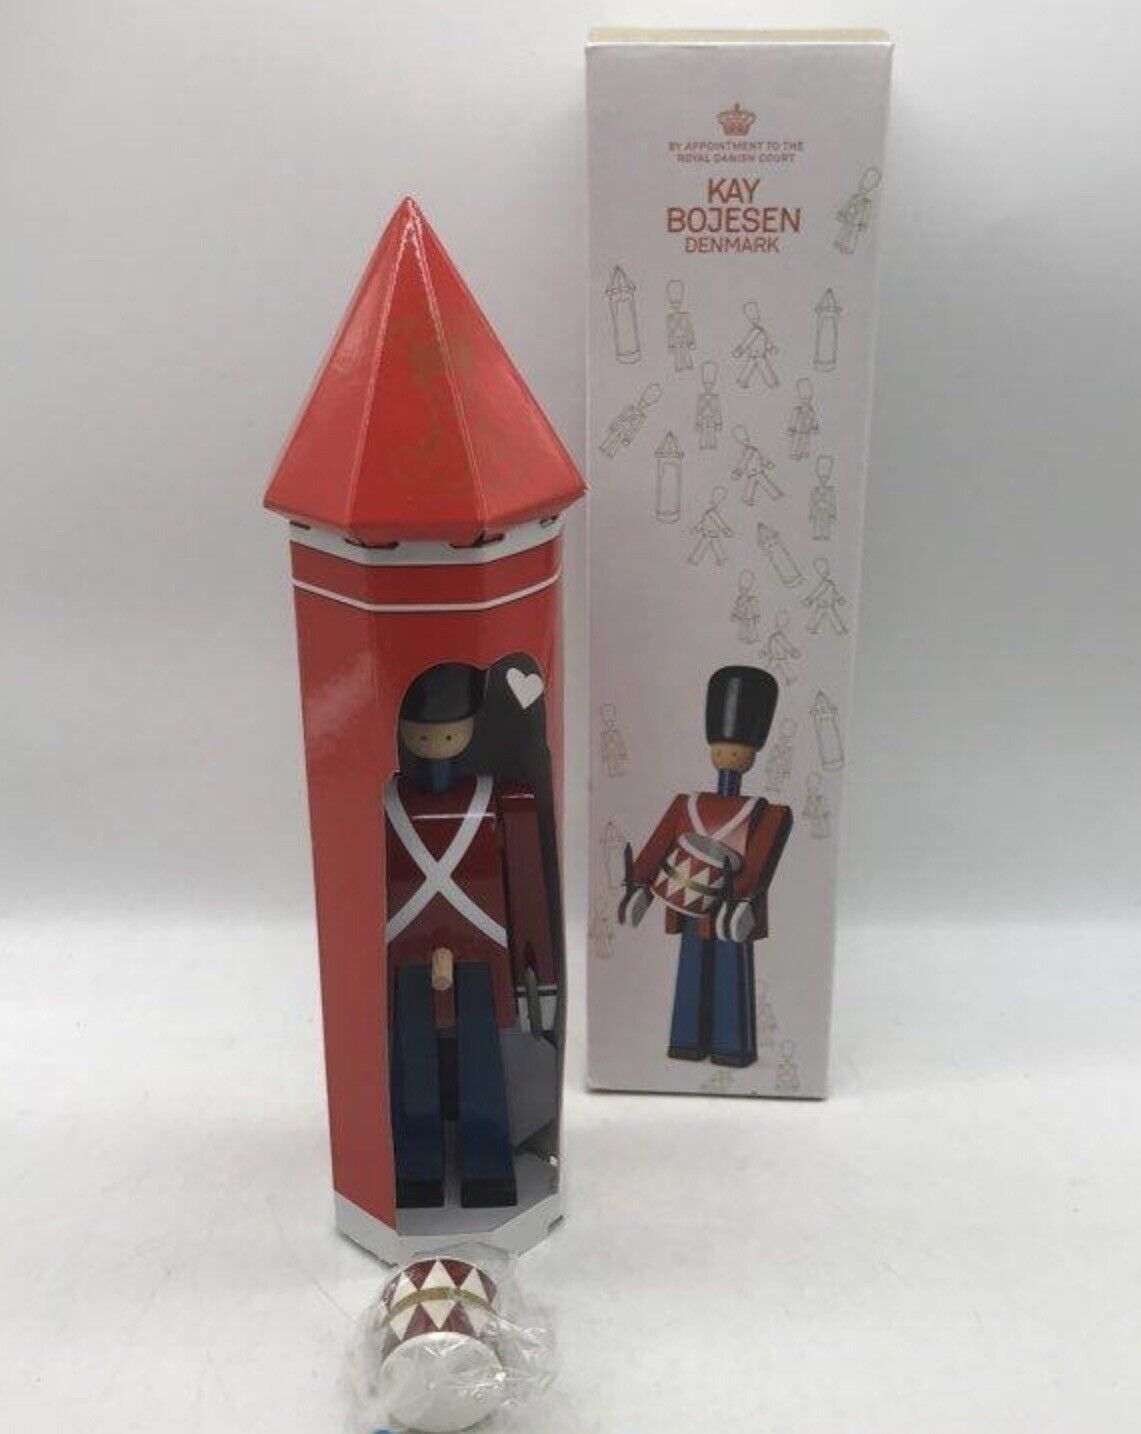 New Vintage Kay Bojesen 8.5” Danish Wooden Toy Soldier With Drum From Denmark